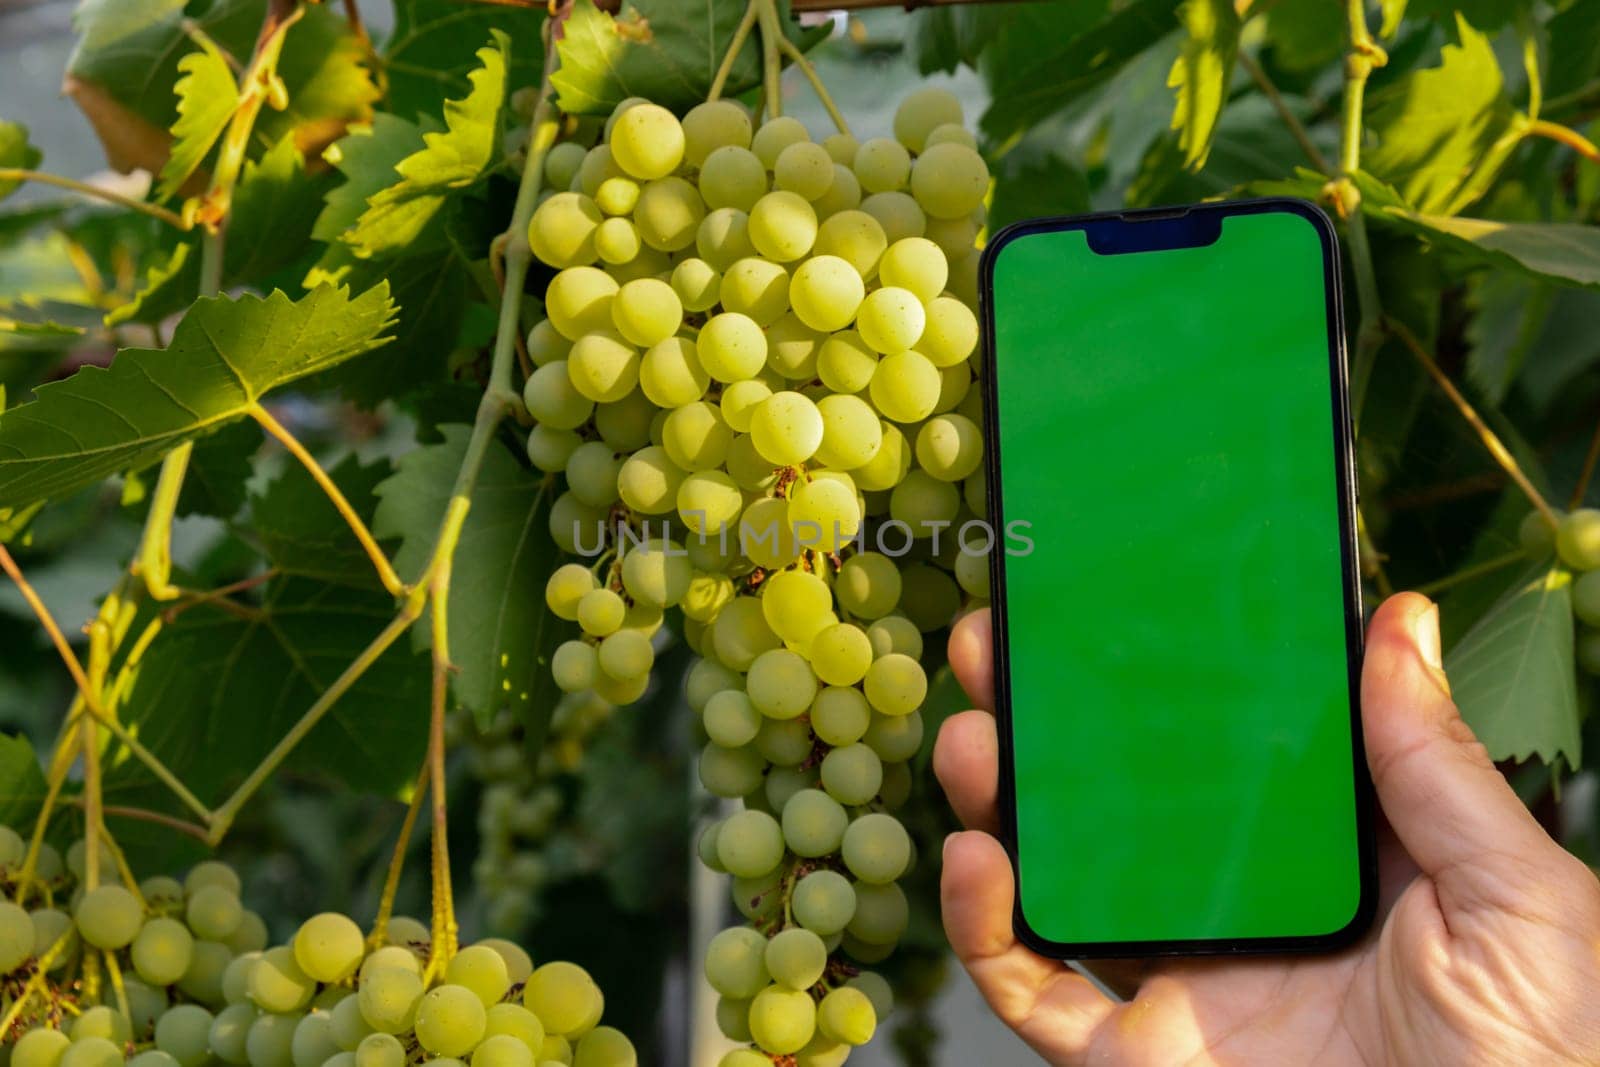 Farmer hand holding mobile phone with empty green chroma key screen. Mock up outside on farm agriculture concept. Green fresh grapes background. Harvesting technology innovations